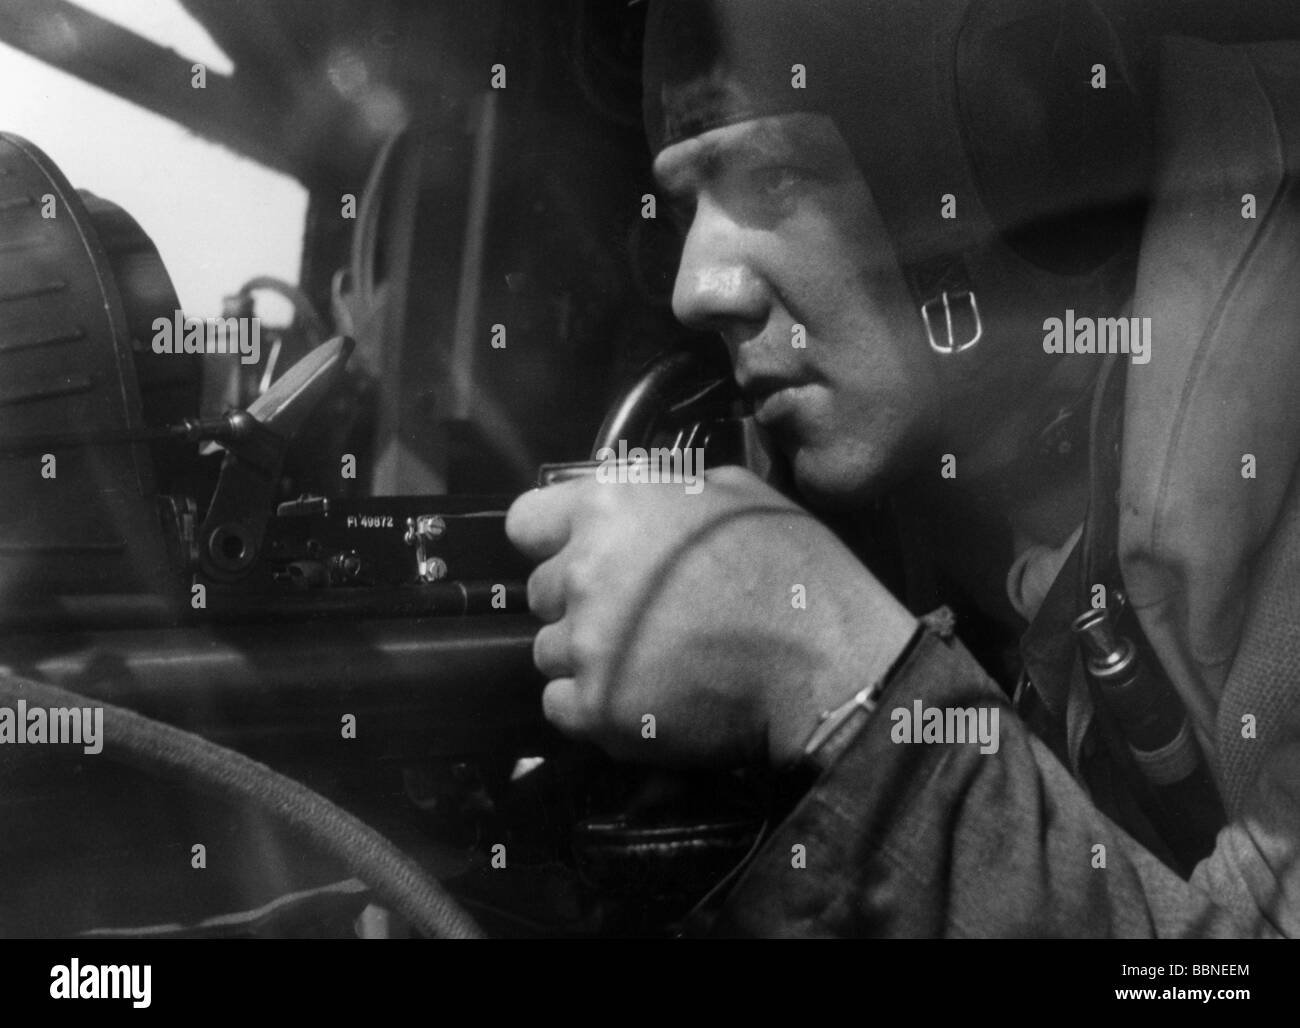 events, Second World War / WWII, aerial warfare, aircraft, details / interiors, observer of a German bomber Dornier Do 217 at his machinegun, Holland, 30.6.1942, machine gun, 20th century, historic, historical, Do217, Do-217, bombers, Luftwaffe, Wehrmacht, Germany, Third Reich, plane, planes, gunner, aiming, soldier, soldiers, people, 1940s, Stock Photo